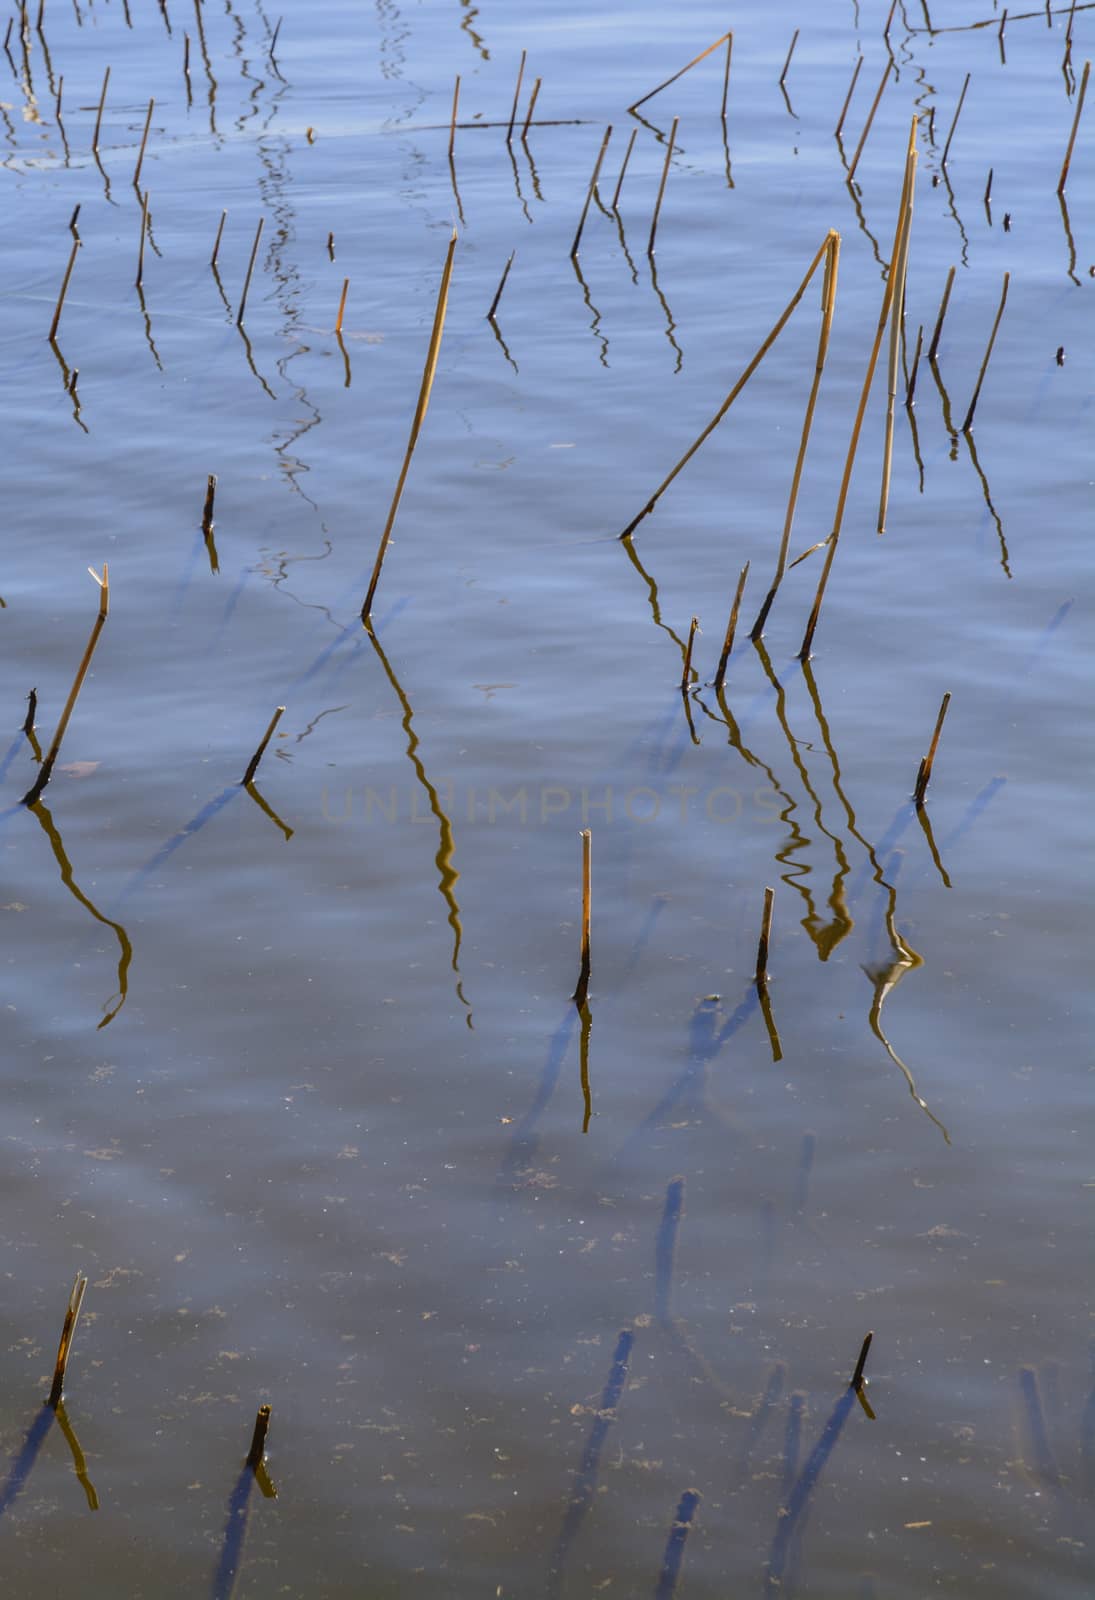 Calm lake surface with last years reed stubs in Lake Malaren, Stockholm, Sweden in May.